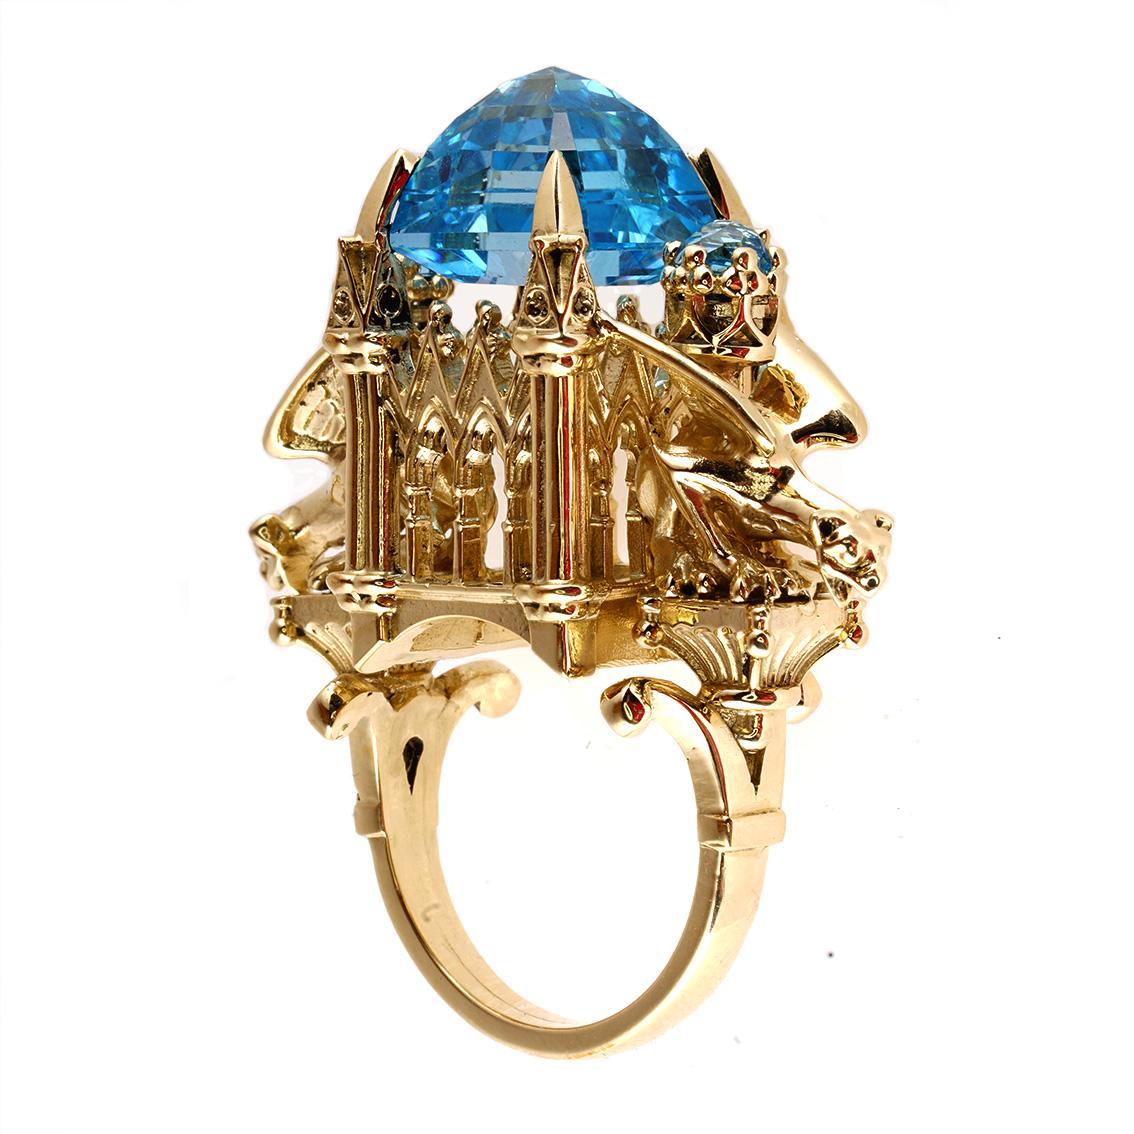 Gothic Revival William Llewellyn Griffiths 9 Karat Gold, Blue Topaz Alchemist Cathedral Ring For Sale